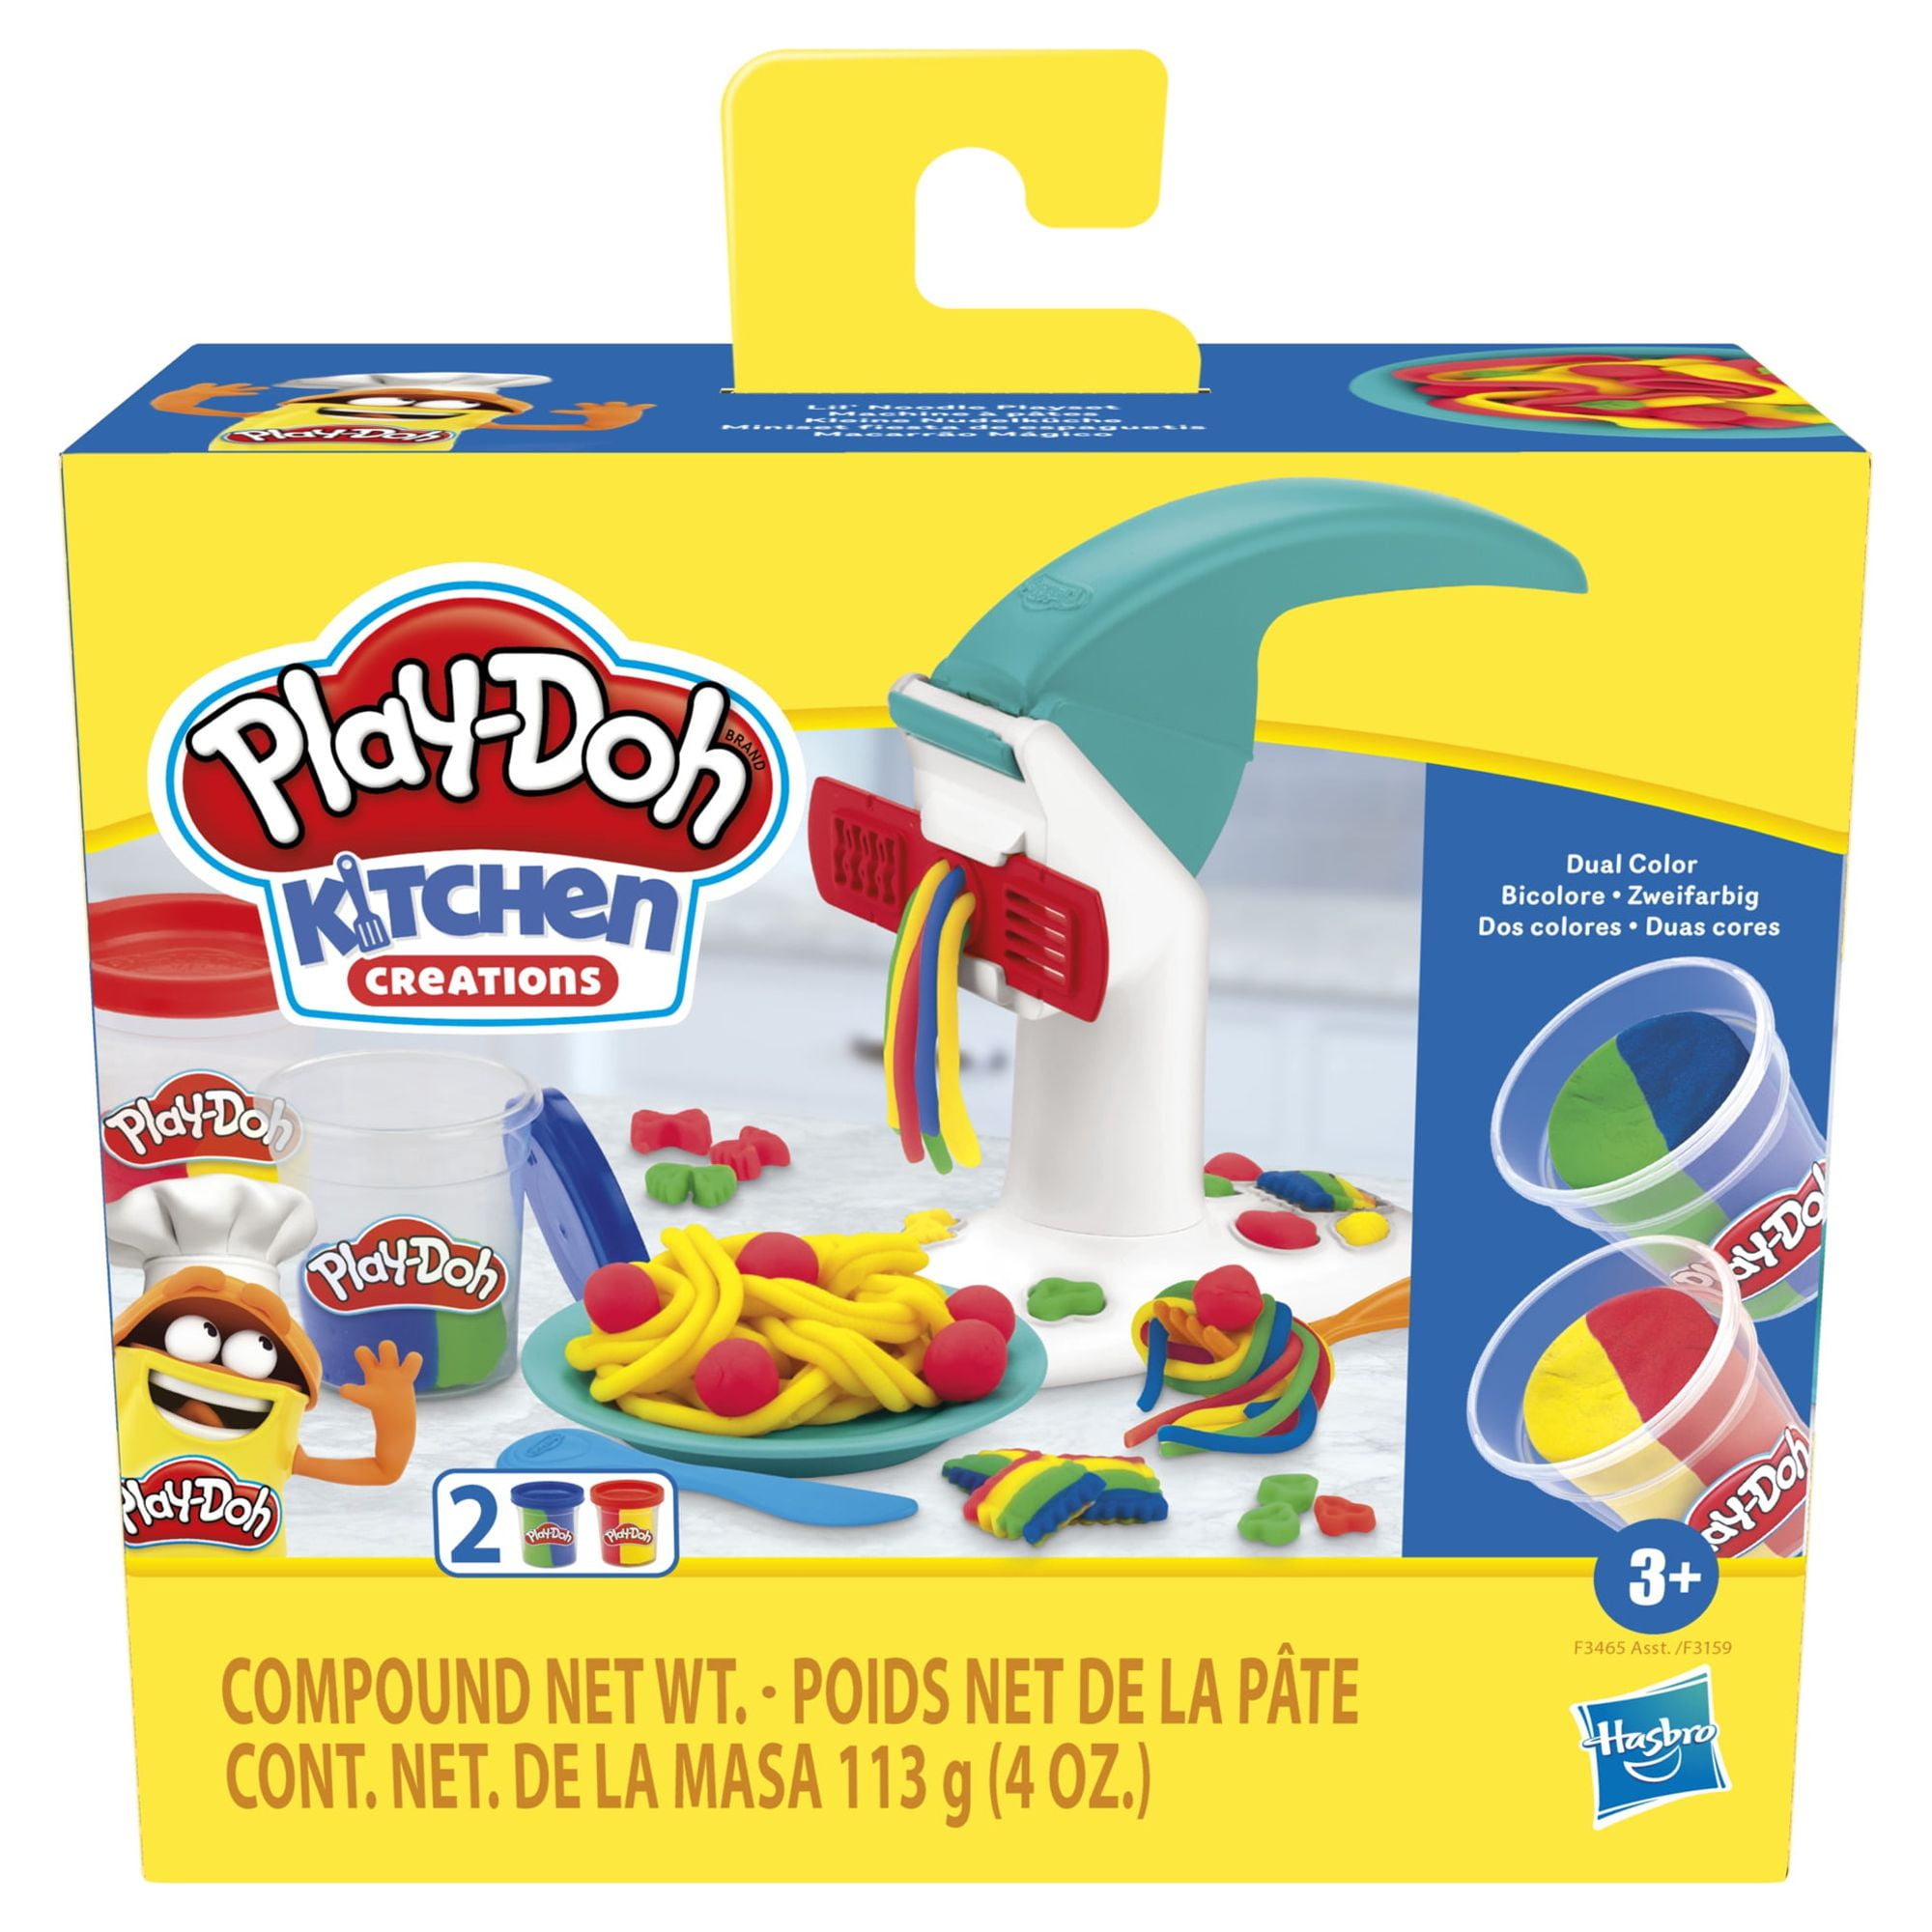 Play-Doh Kitchen Creations Lil’ Noodle Play Dough Set - 4 Color (2 Piece), Only At Walmart $5.44